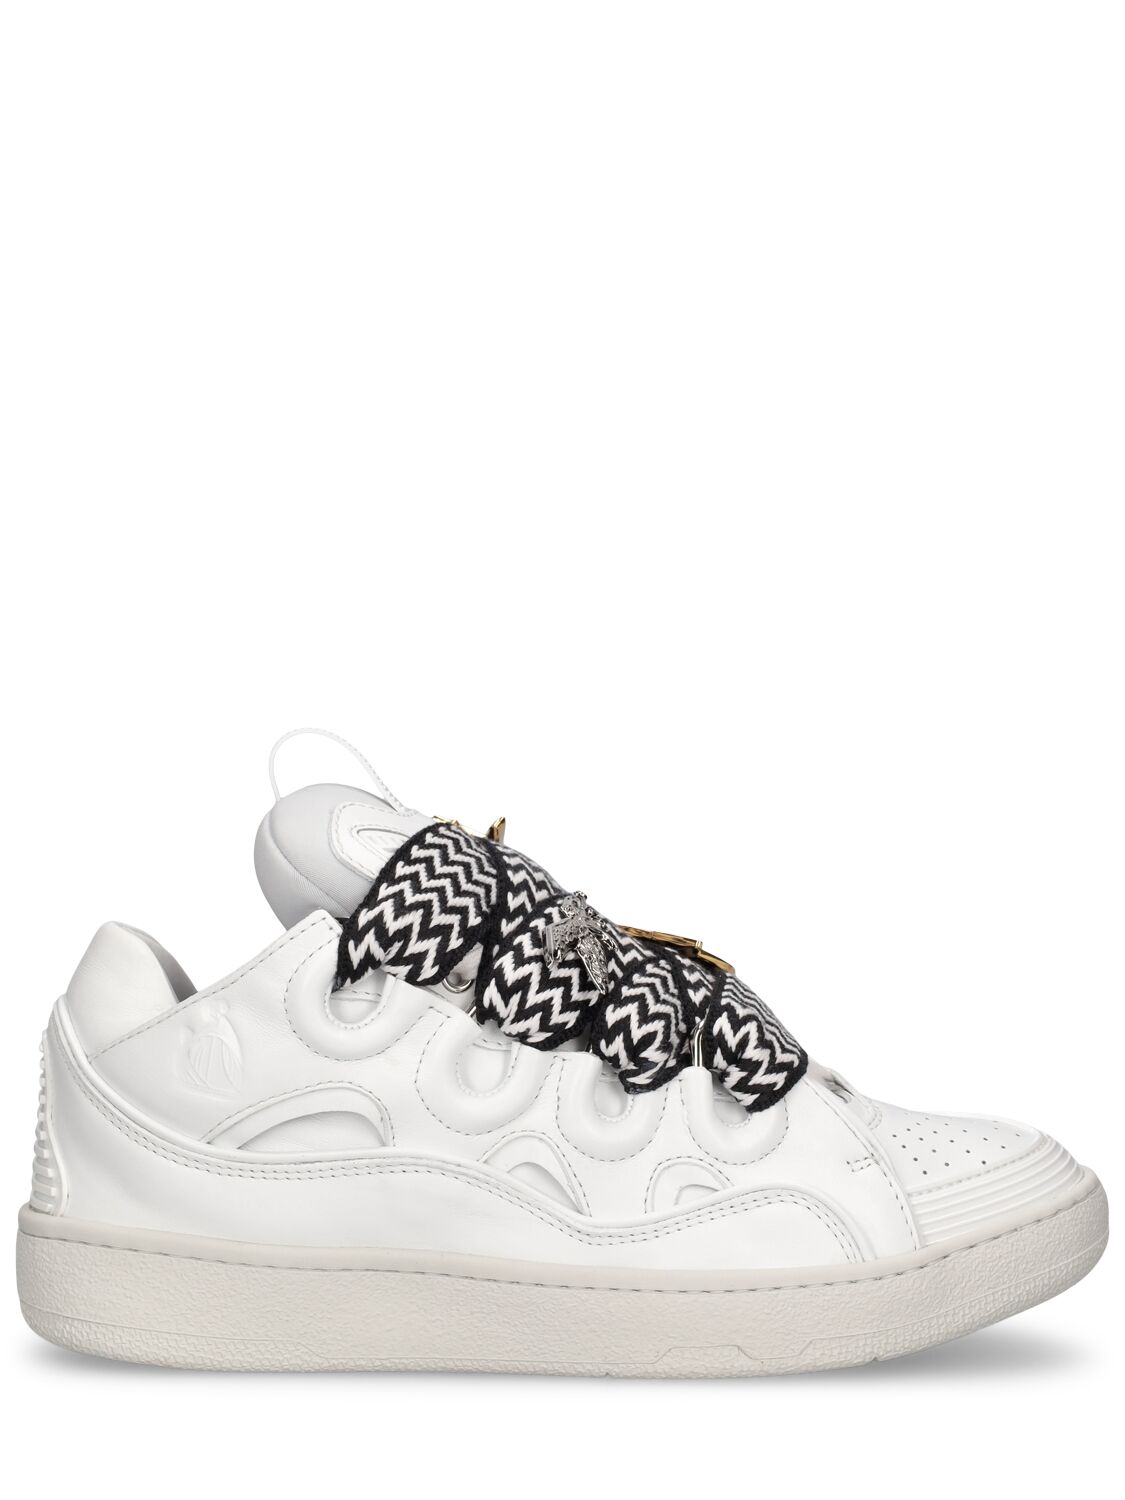 Lanvin Curb Leather And Pins Sneakers In White